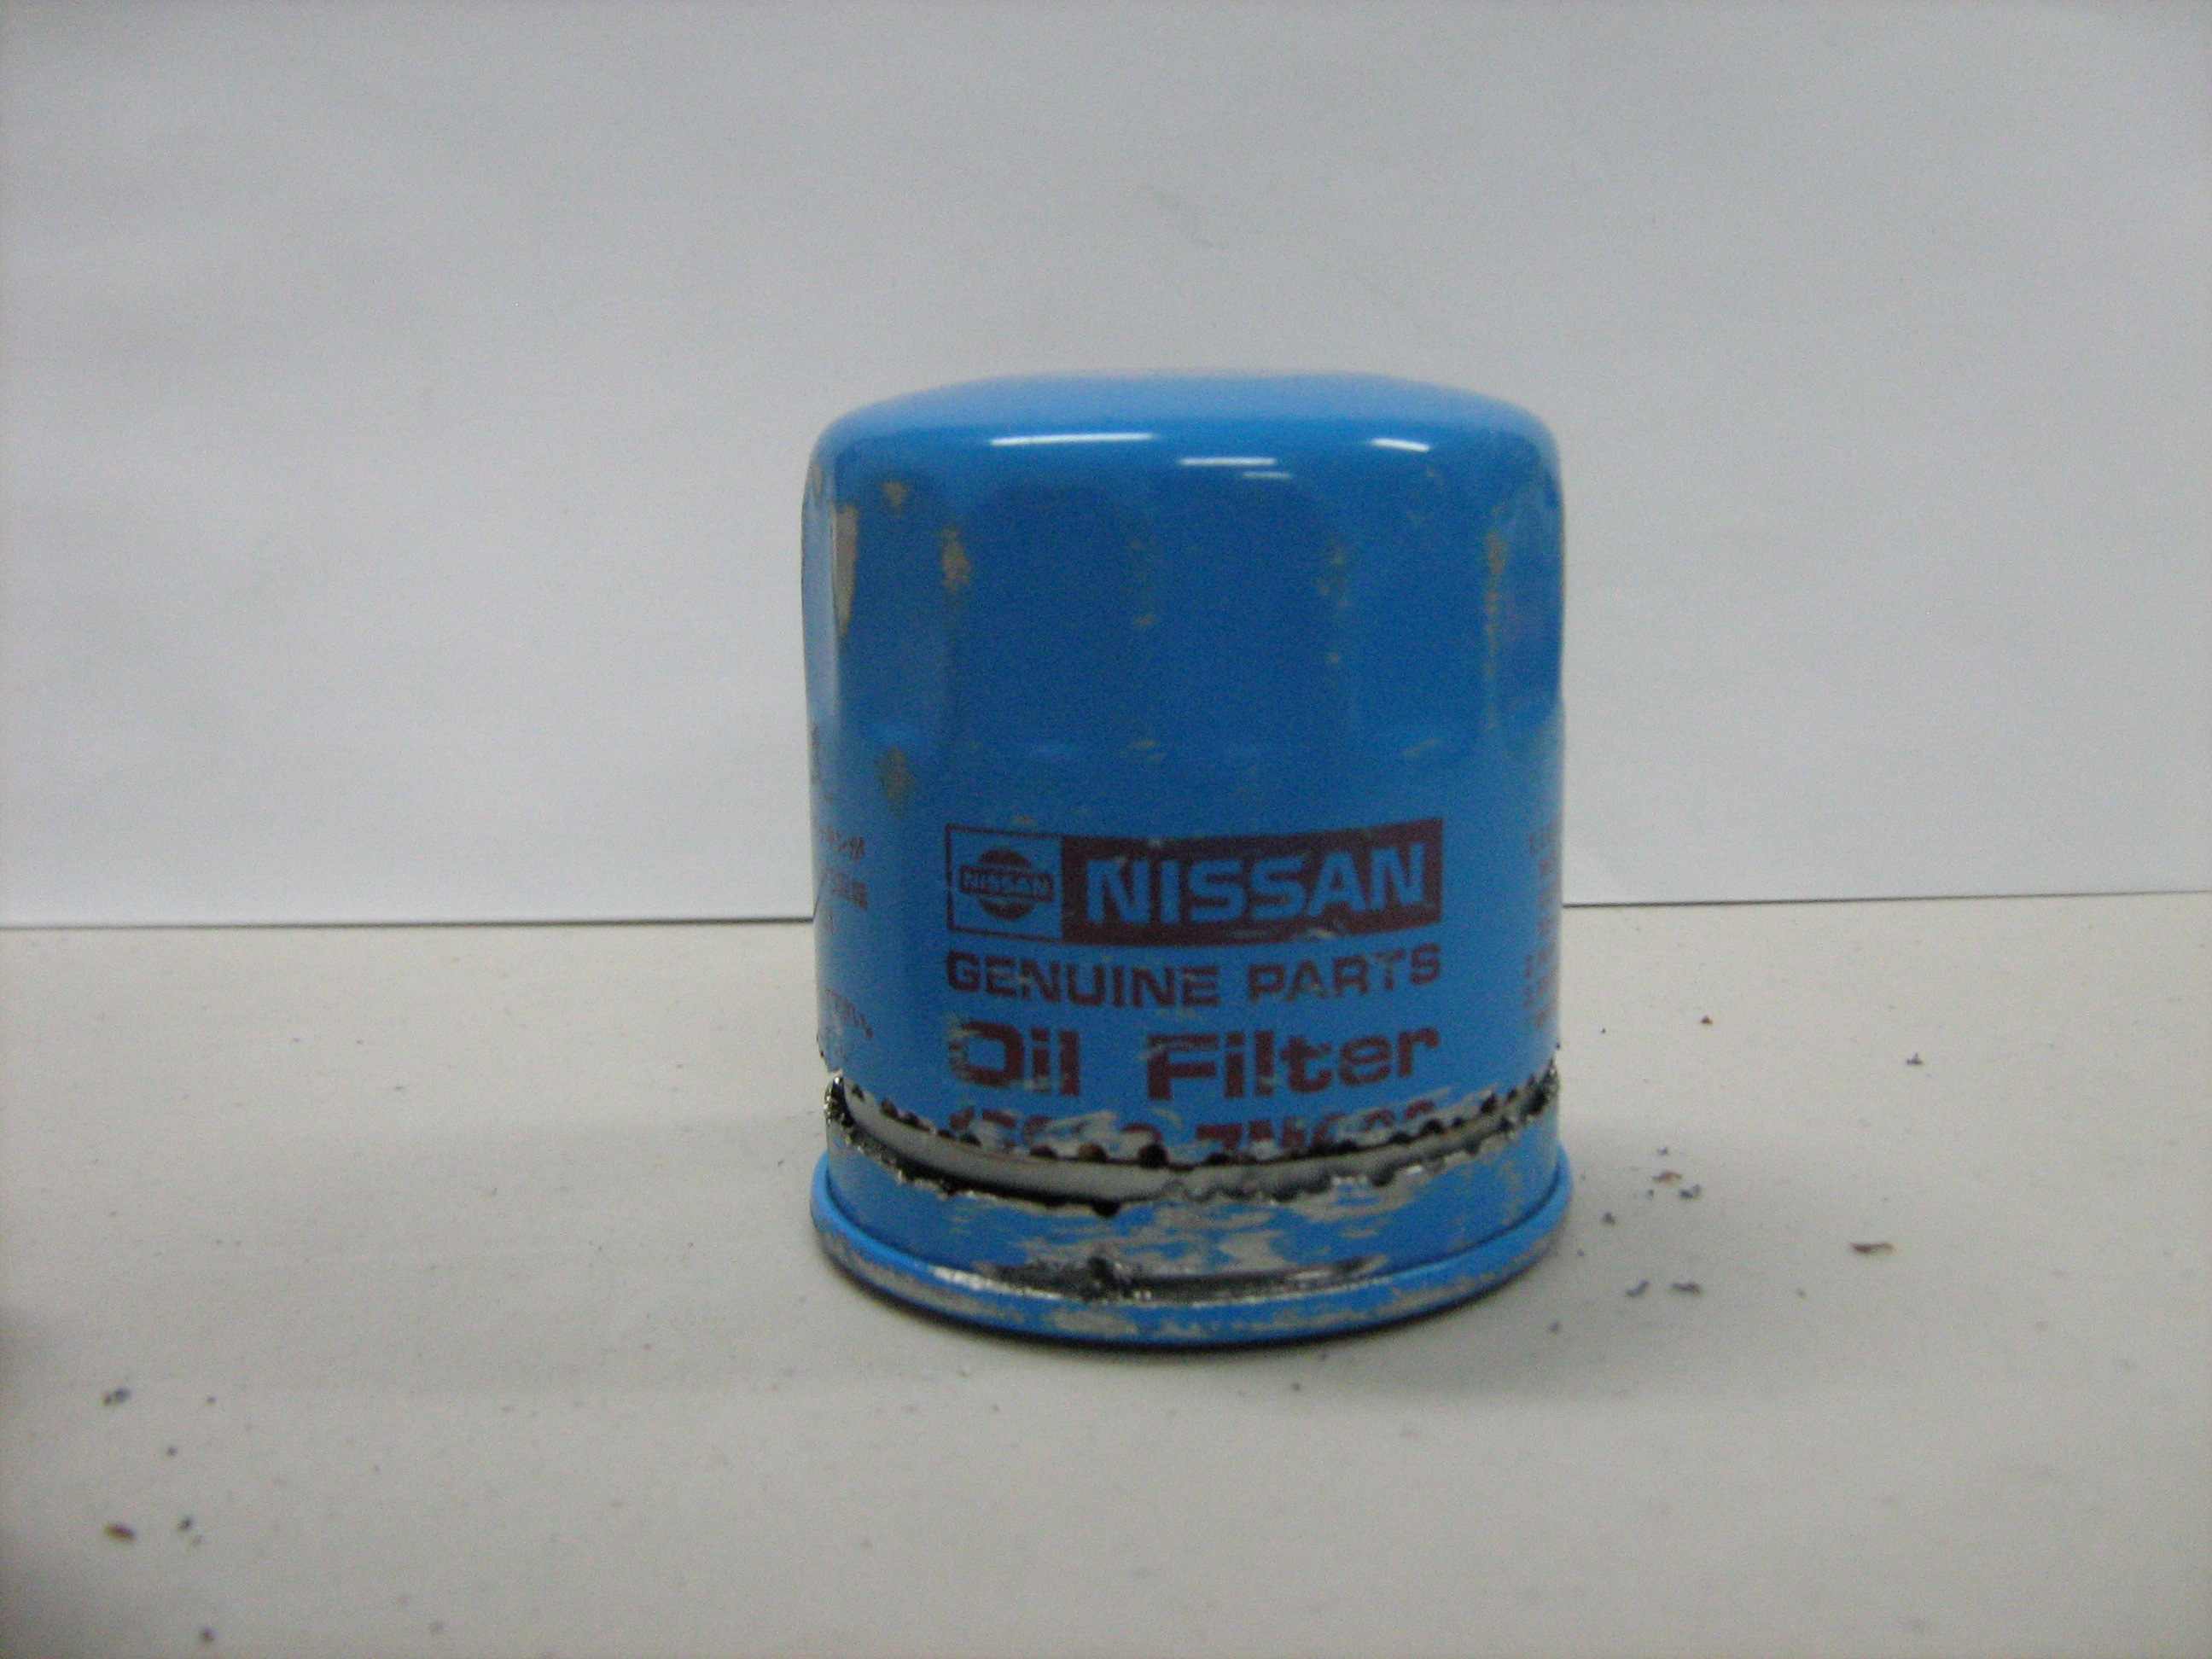 nissan oil filters